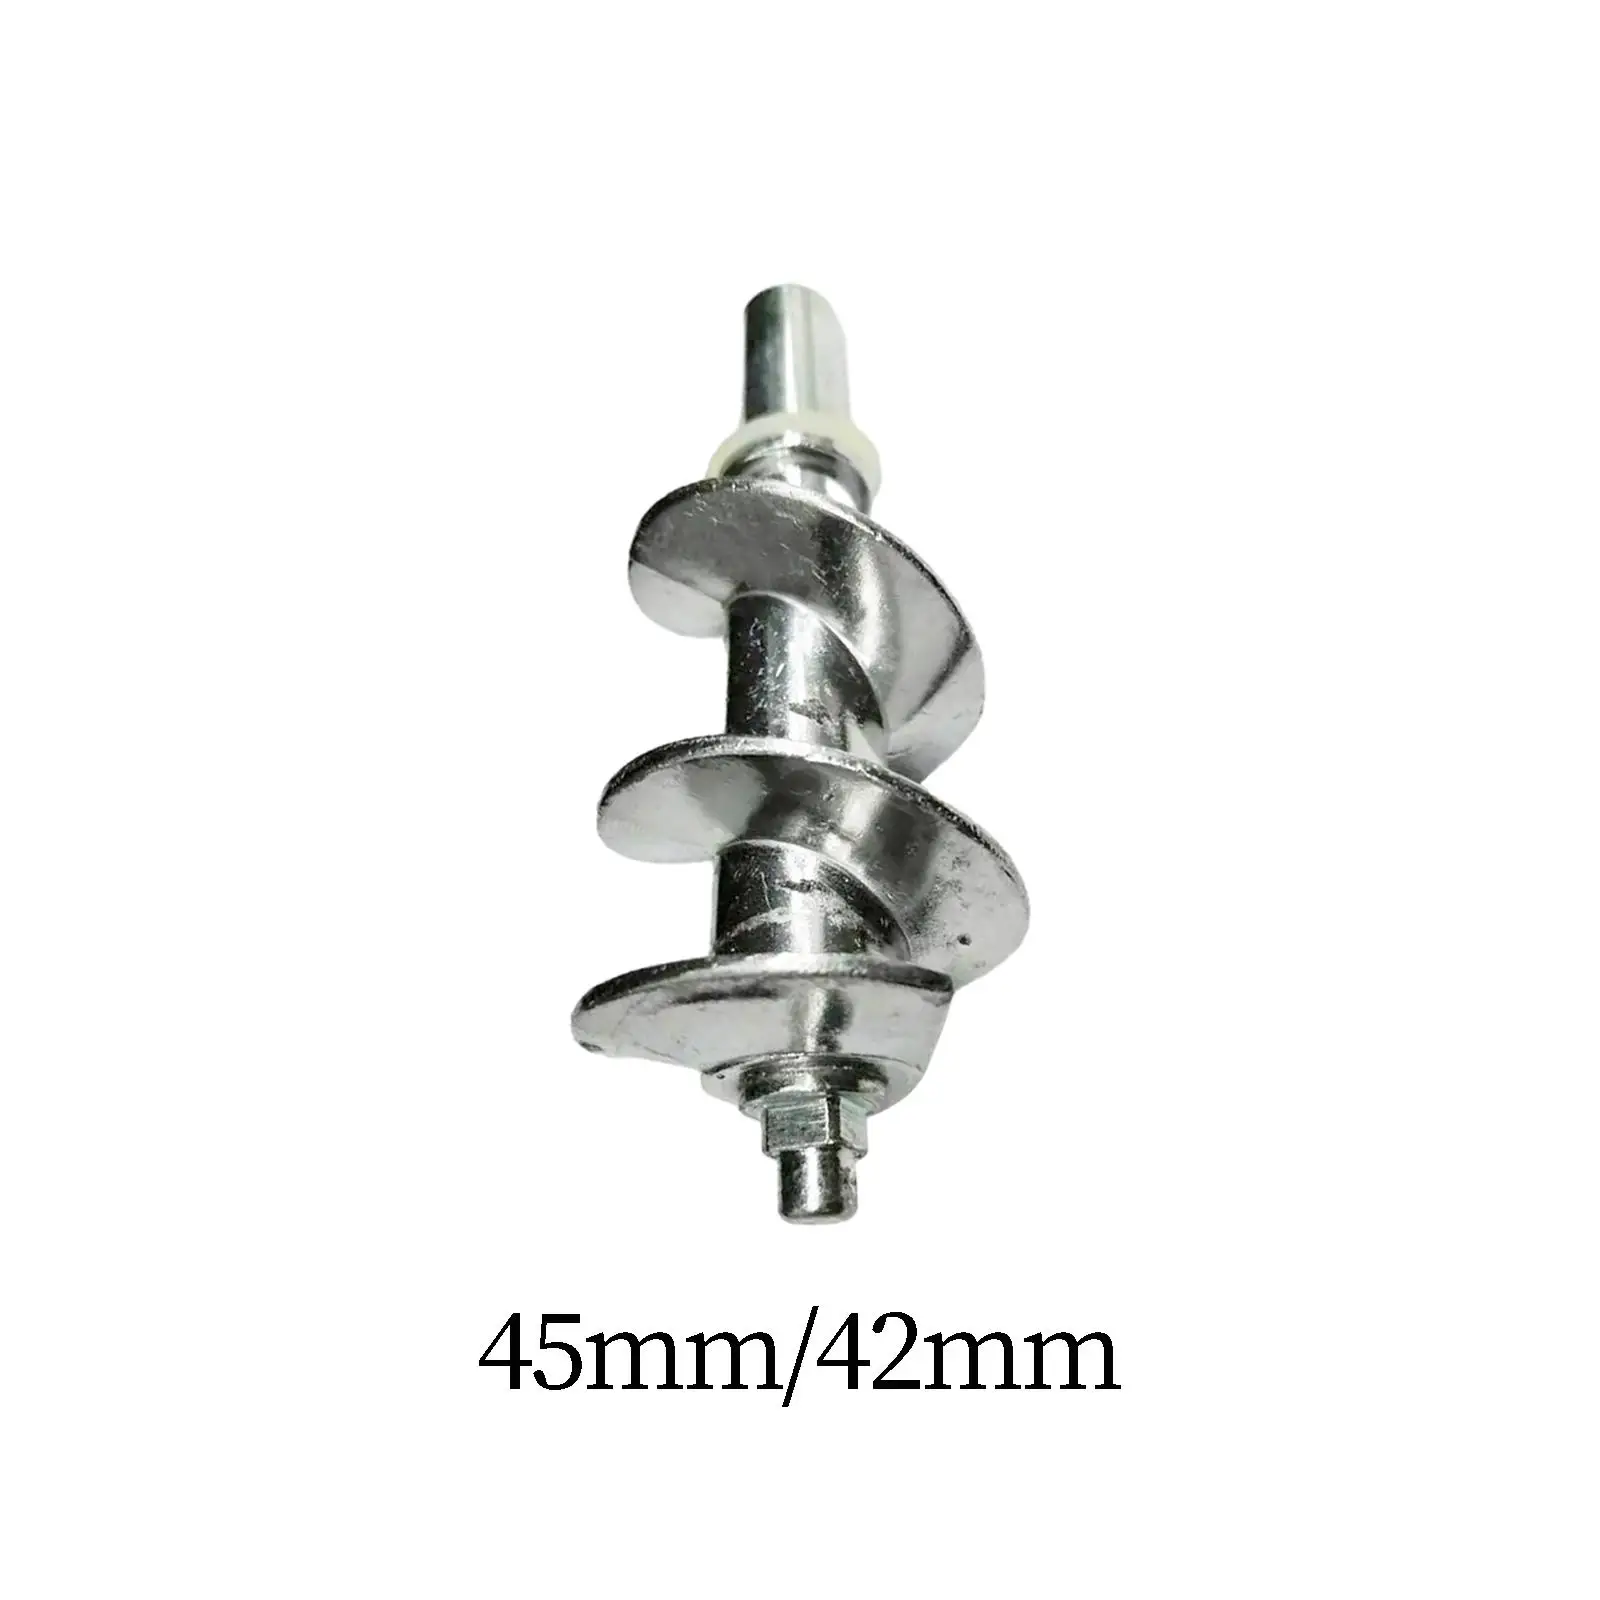 Meat Grinder Screw Auger Duable Accessories Replacement Meat Grinder Screw Attachment for PN005 G20prpwdr MG1501 Pmg 2008 MG1000